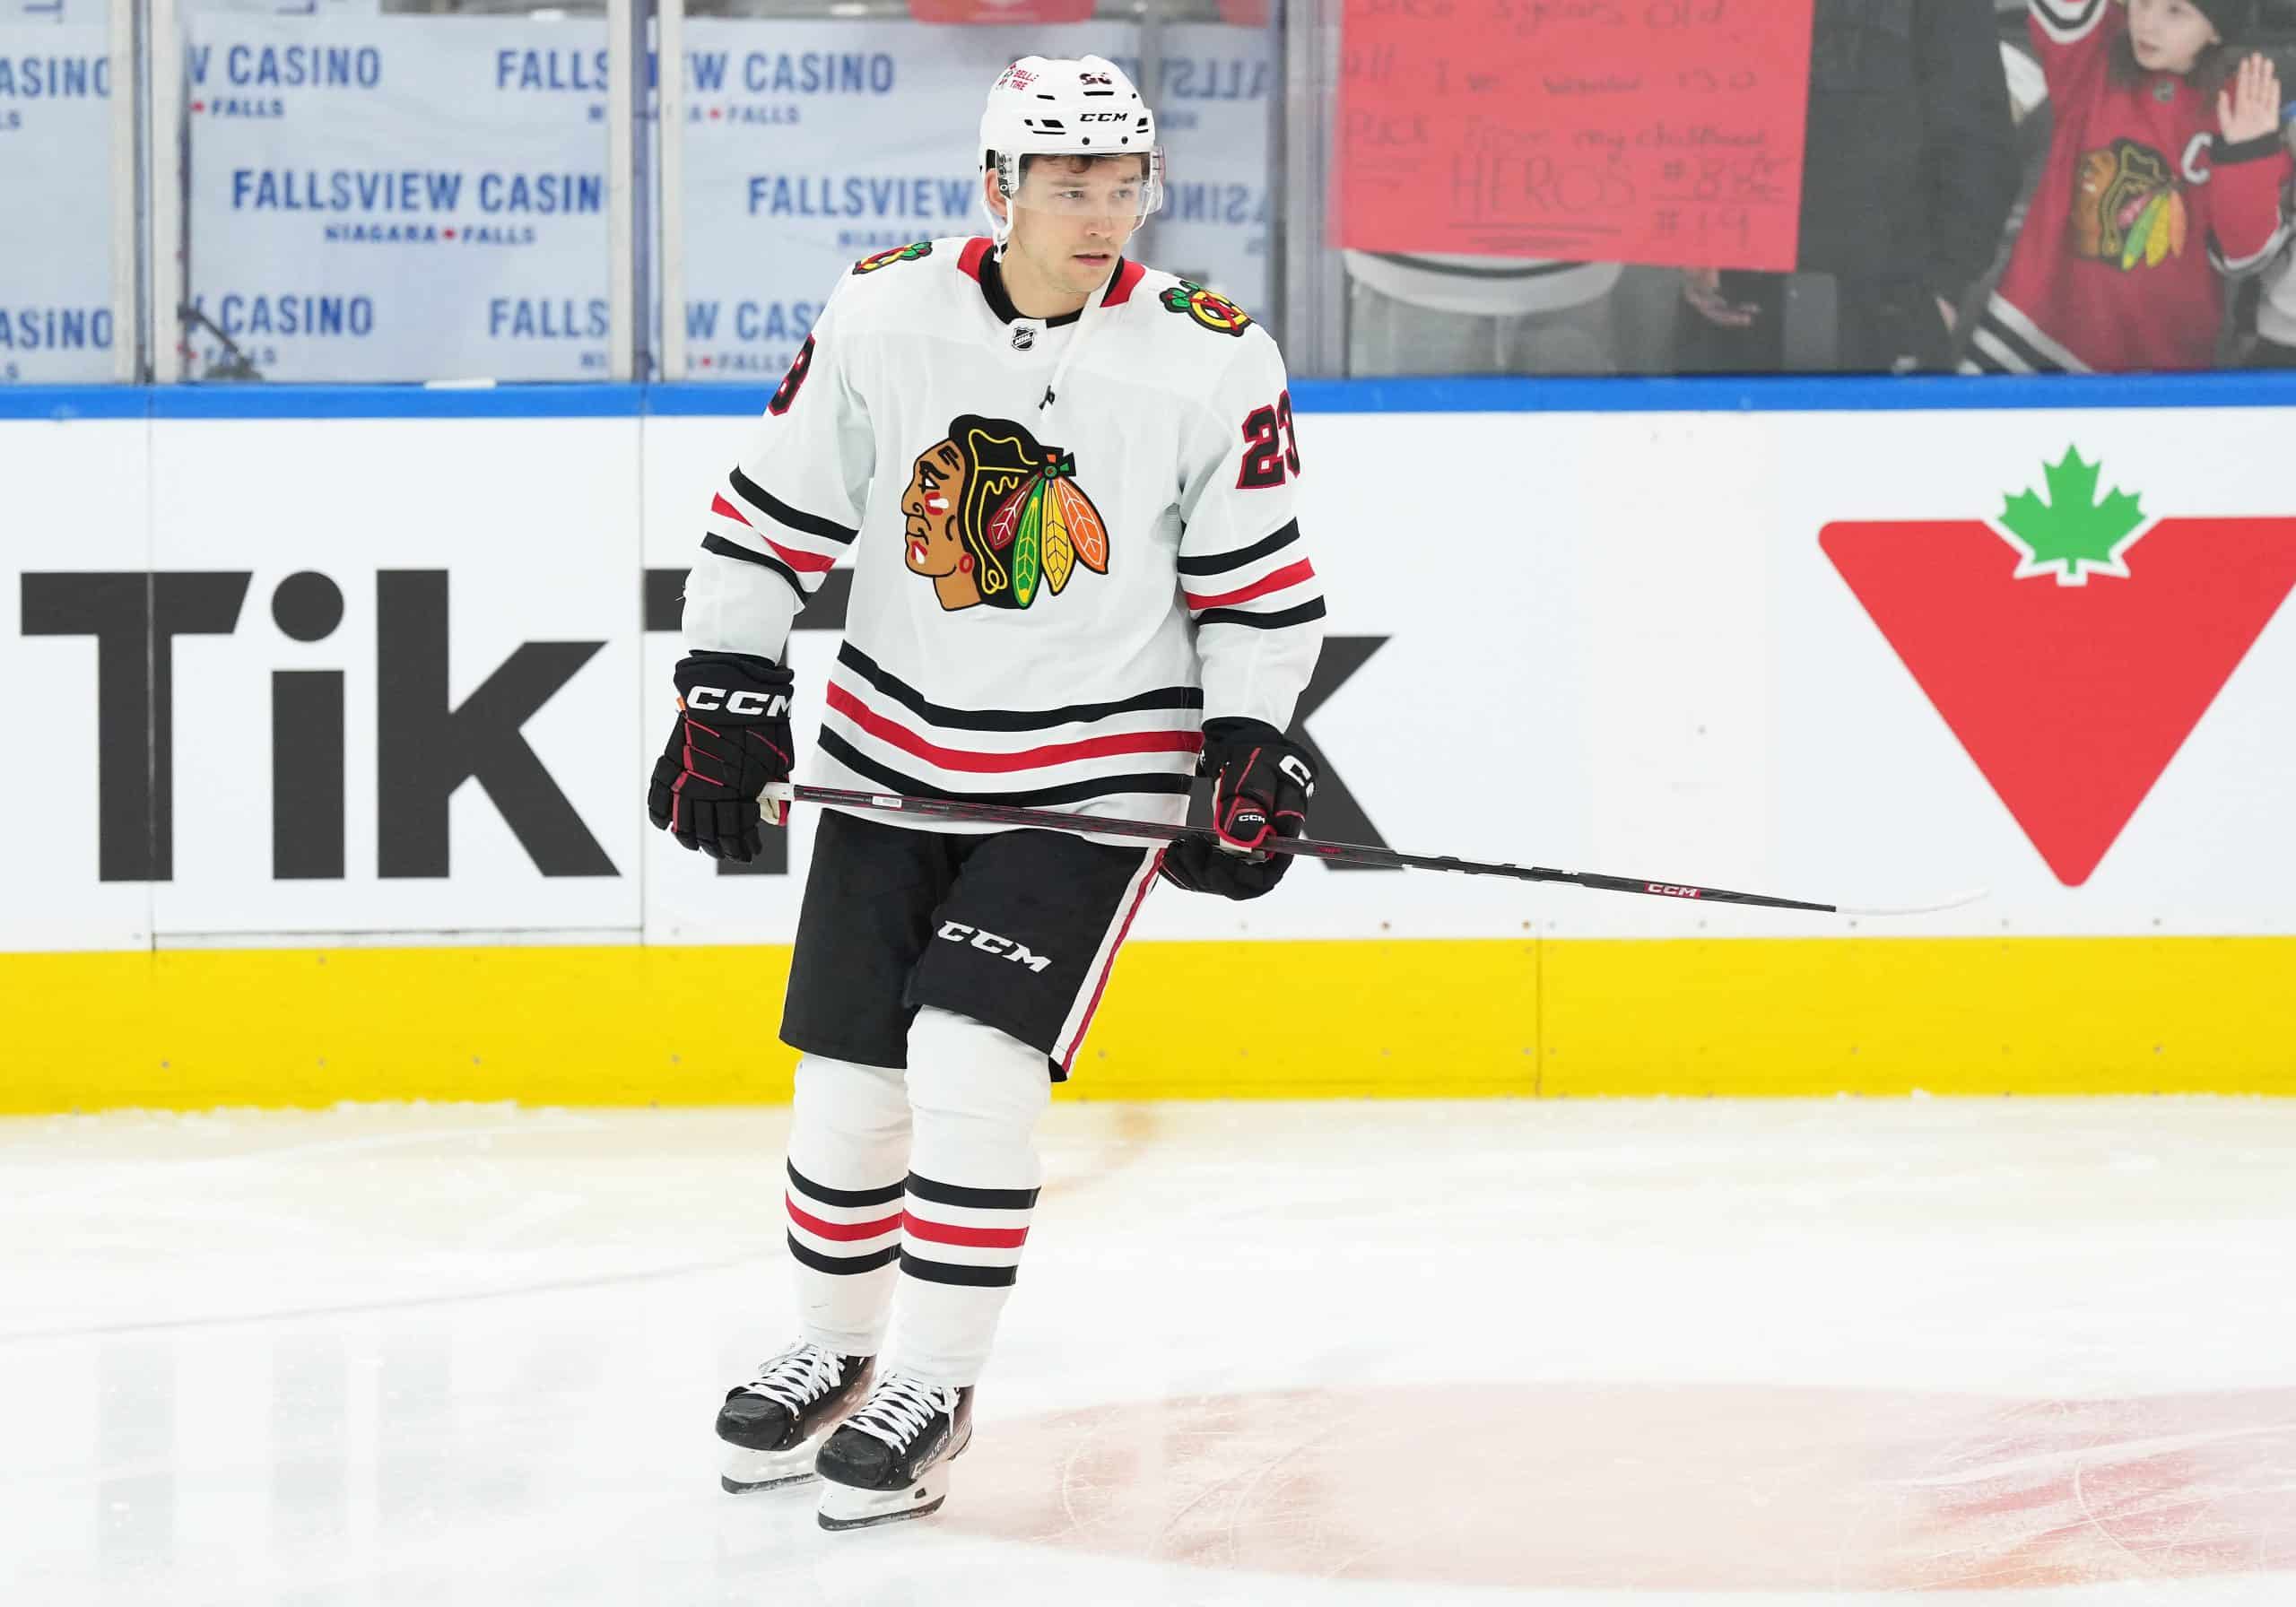 Blackhawks Free Agency Preview Is A Trade In The Works? (+Other Notes)